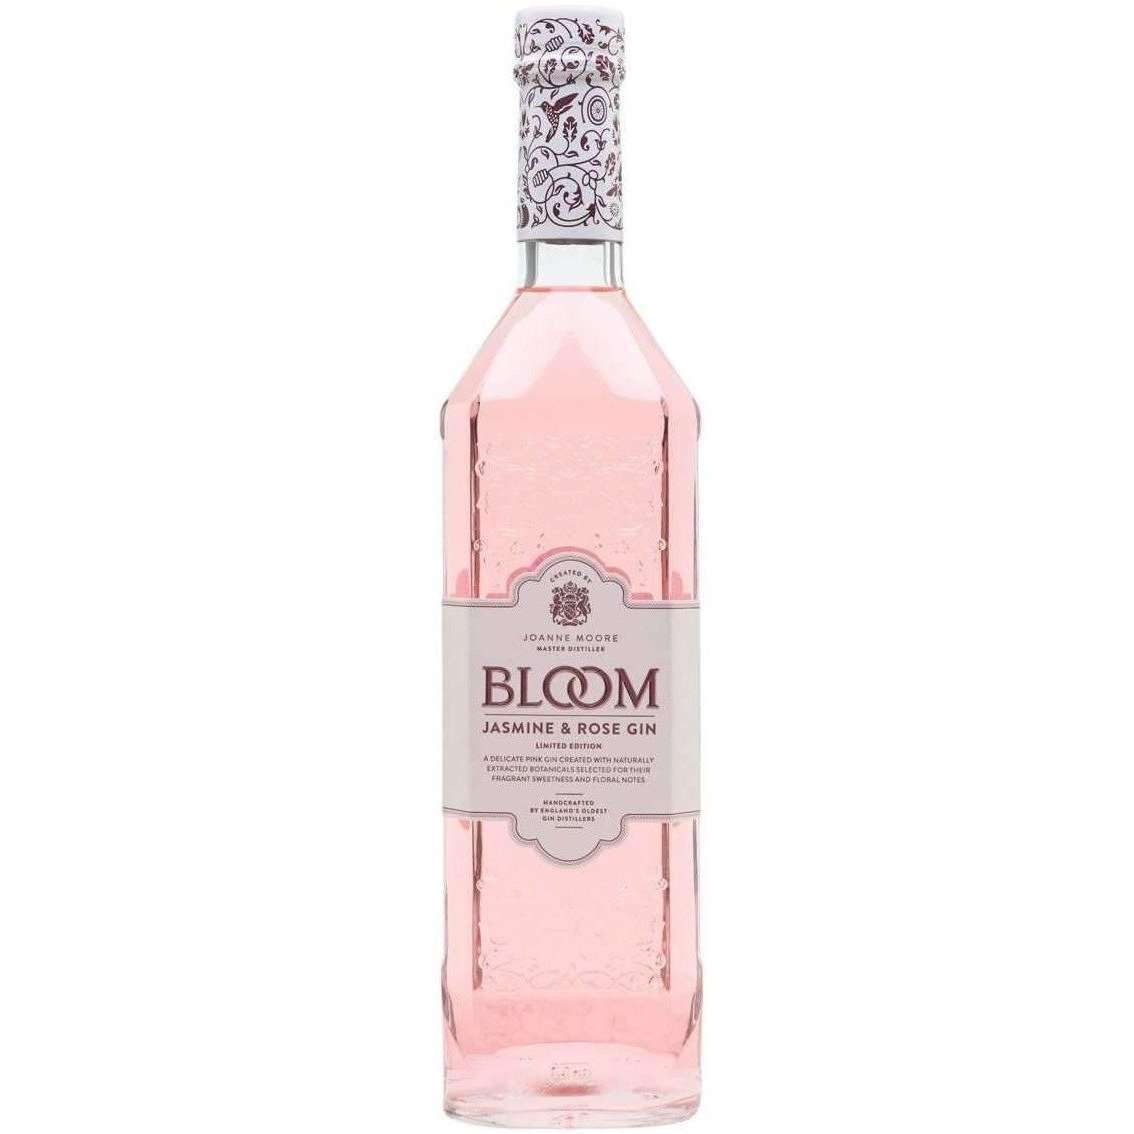 Bloom Jasmine and Rose Gin 40% 70cl